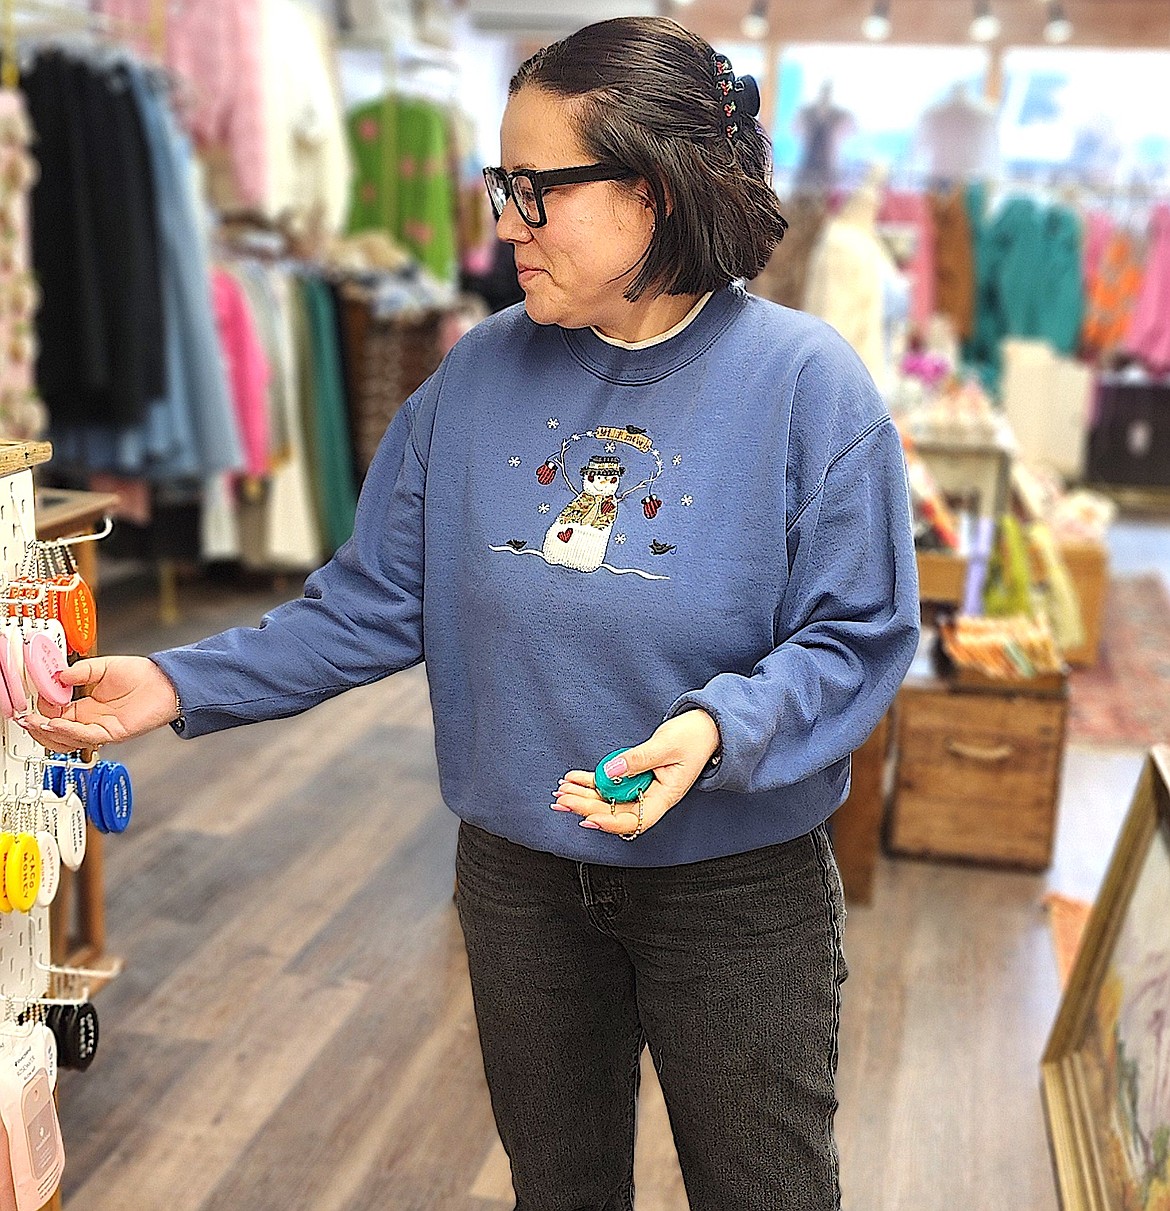 Carmen Burke, owner of The Little Shop Montana, displays a "squeezy" coin purse, one of the many fun vintage inspired or vintage items in her fun shop. (Berl Tiskus/Leader)